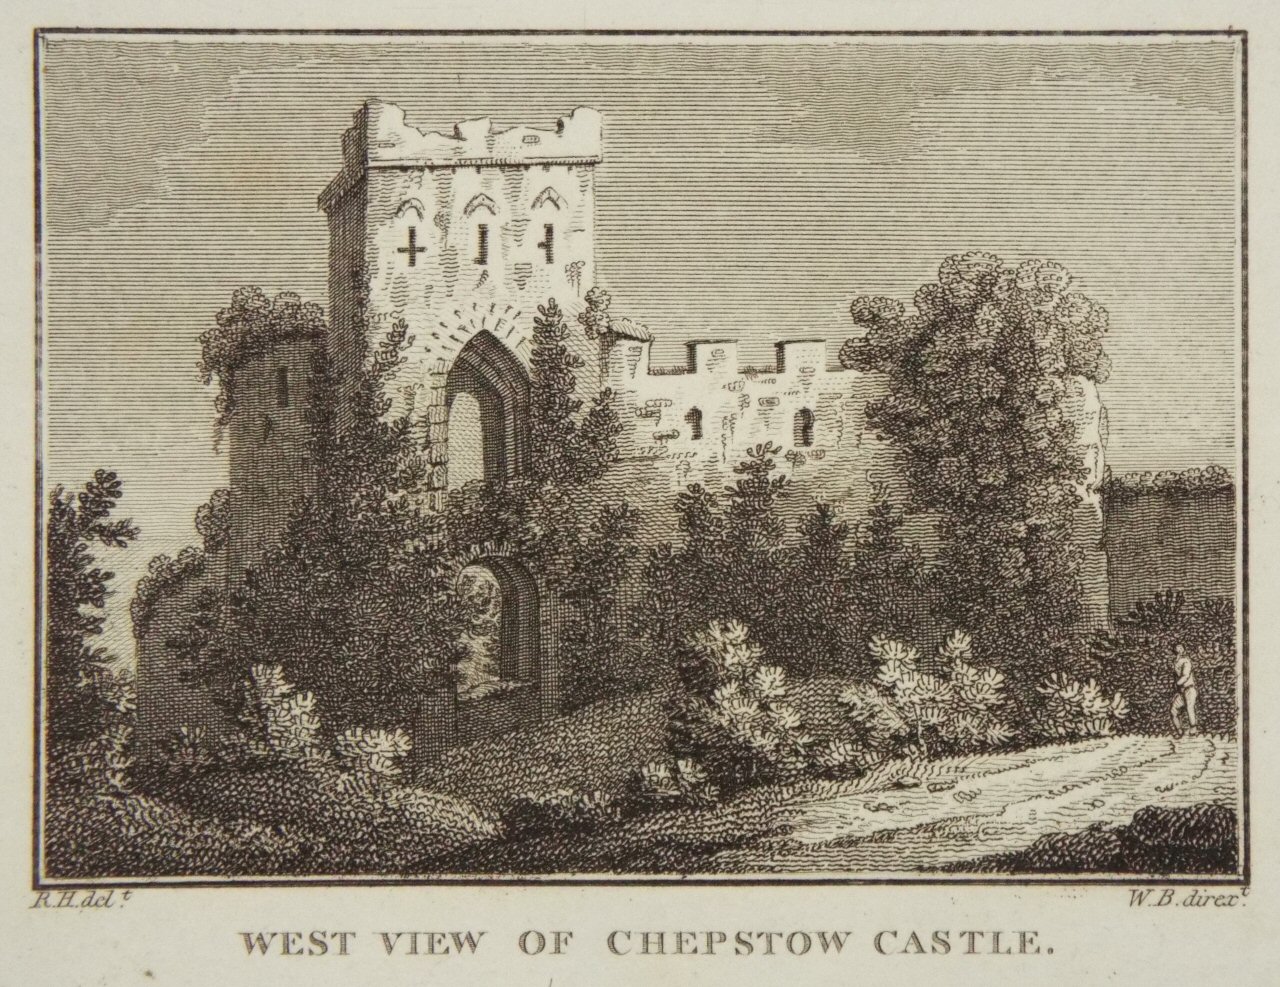 Print - West View of Chepstow Castle. - W